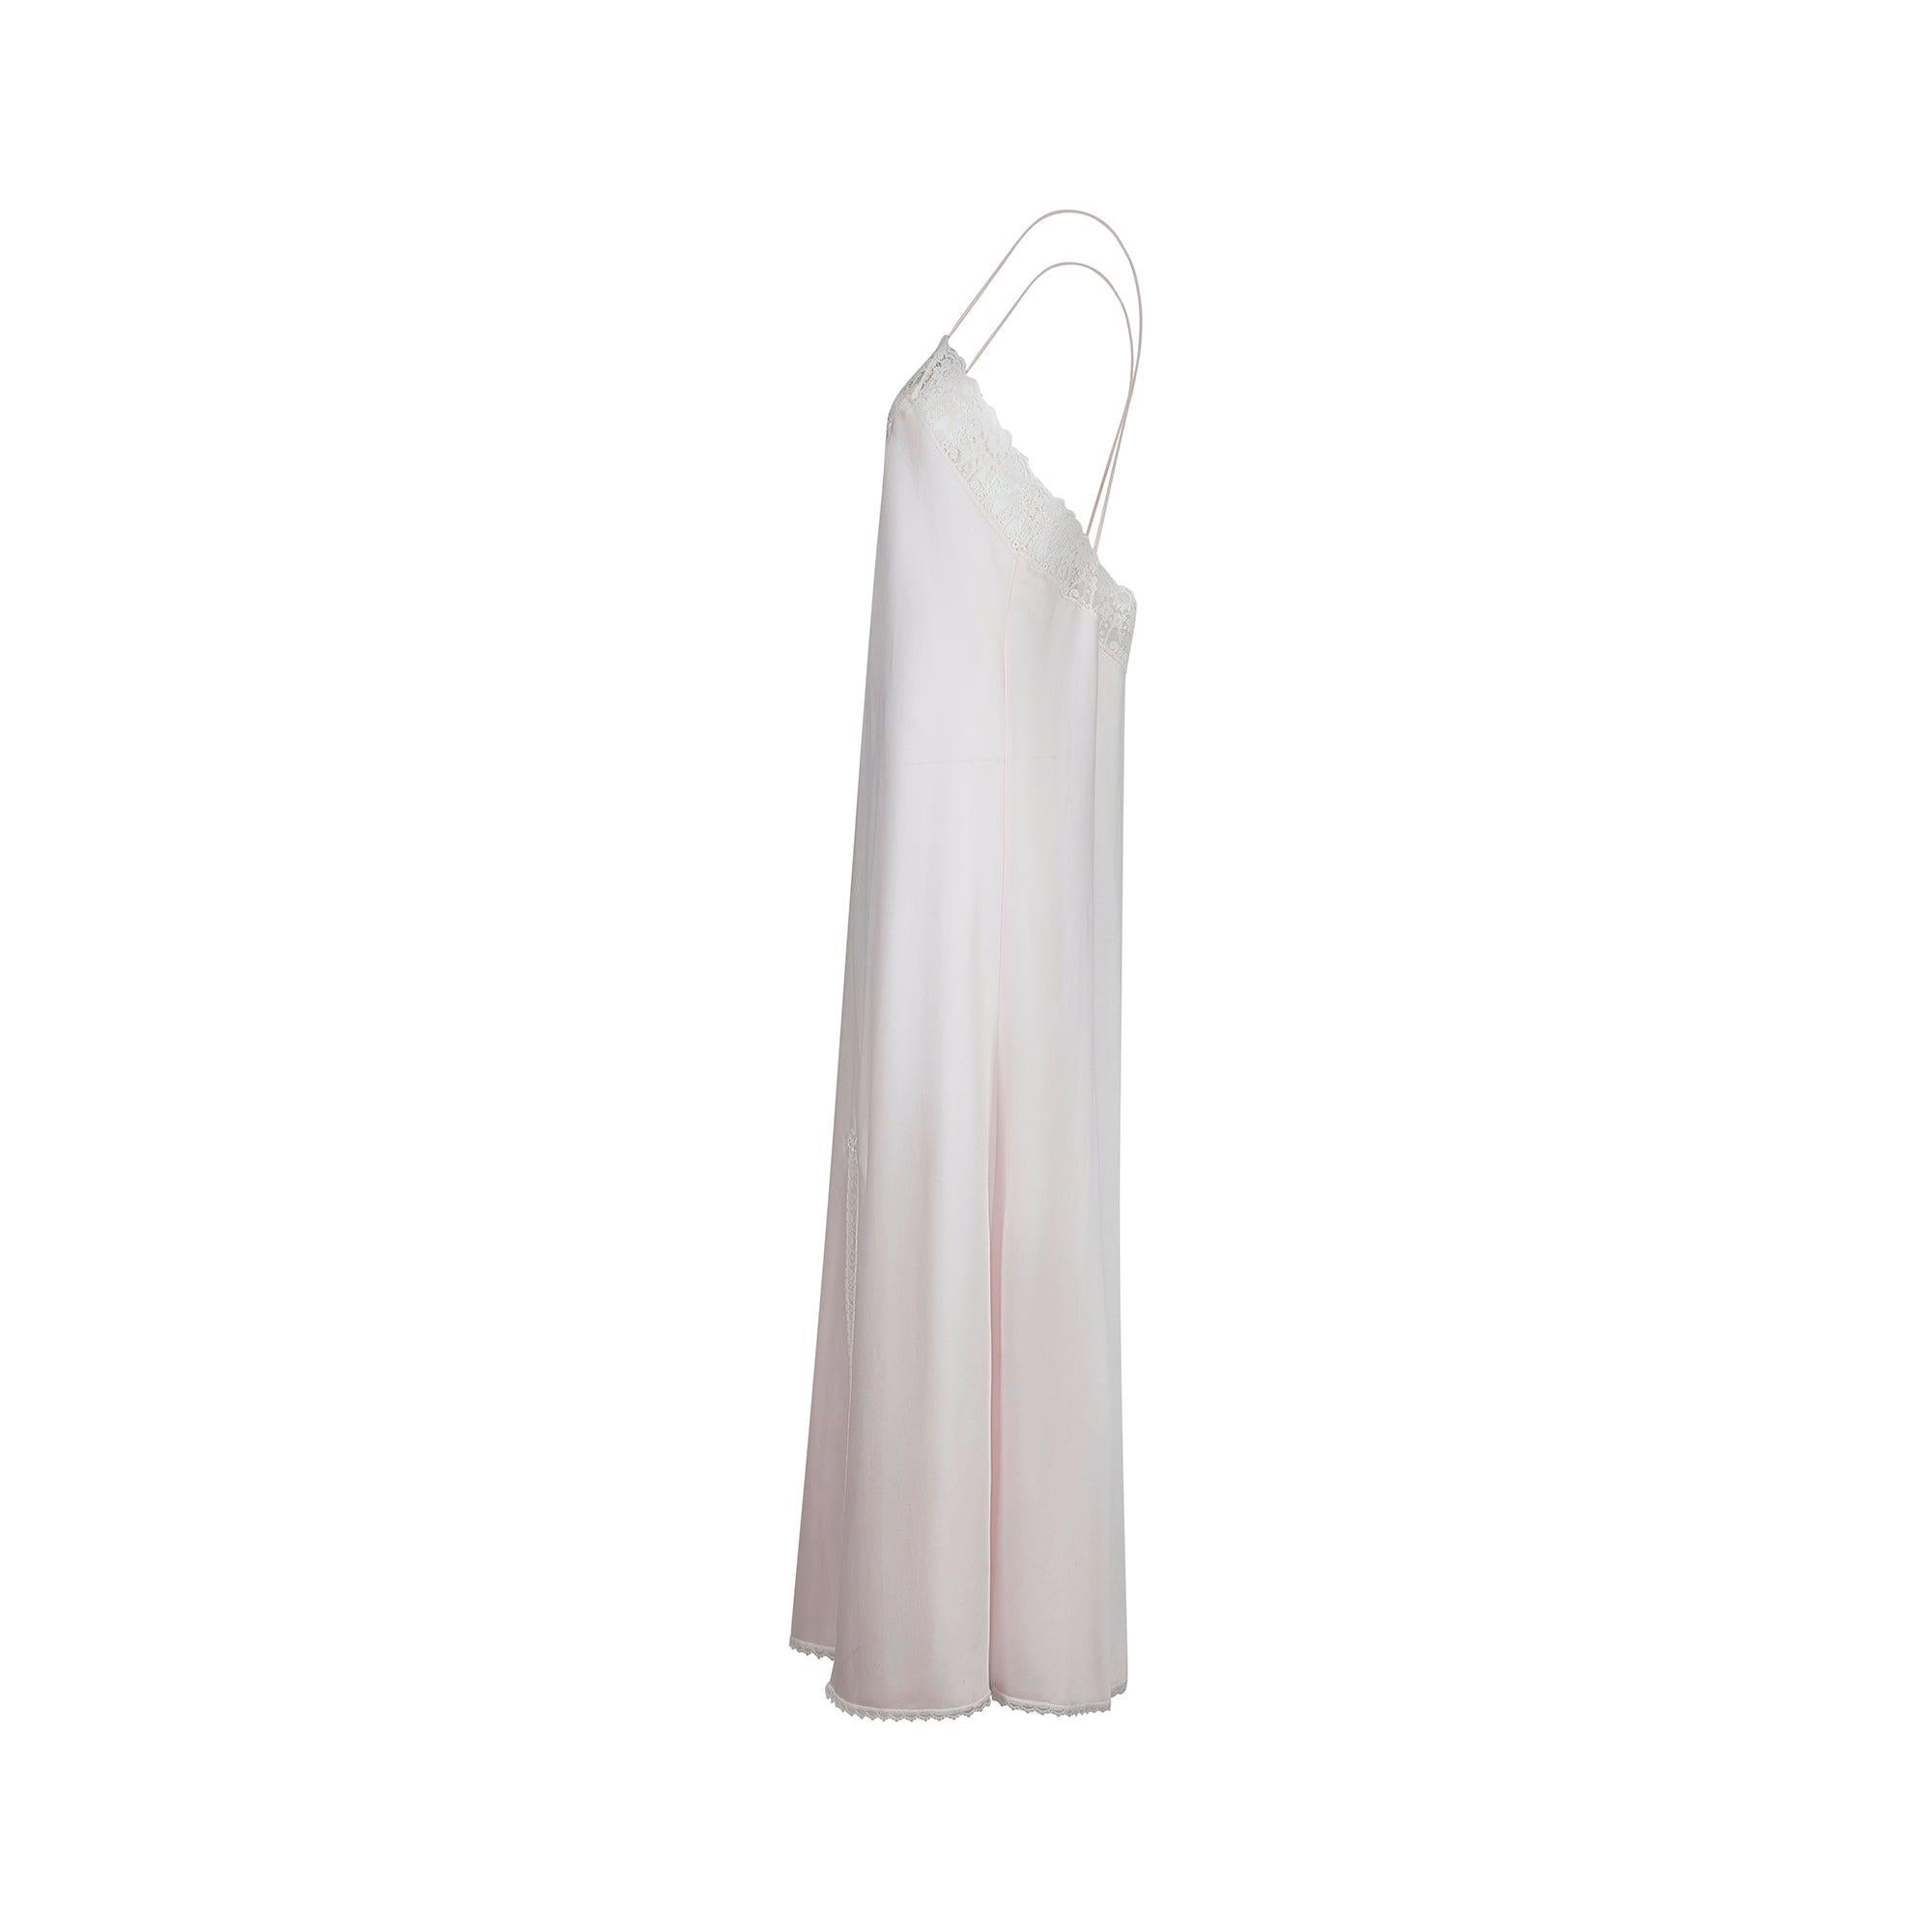 This pretty 1990s slip dress is by Christian Dior. The brand label reads “Christian Dior Lingerie” and it most likely pre-dates John Galliano's tenure as Creative Director. Tailored in the US from man-made matte satin in palest rose pink, it is